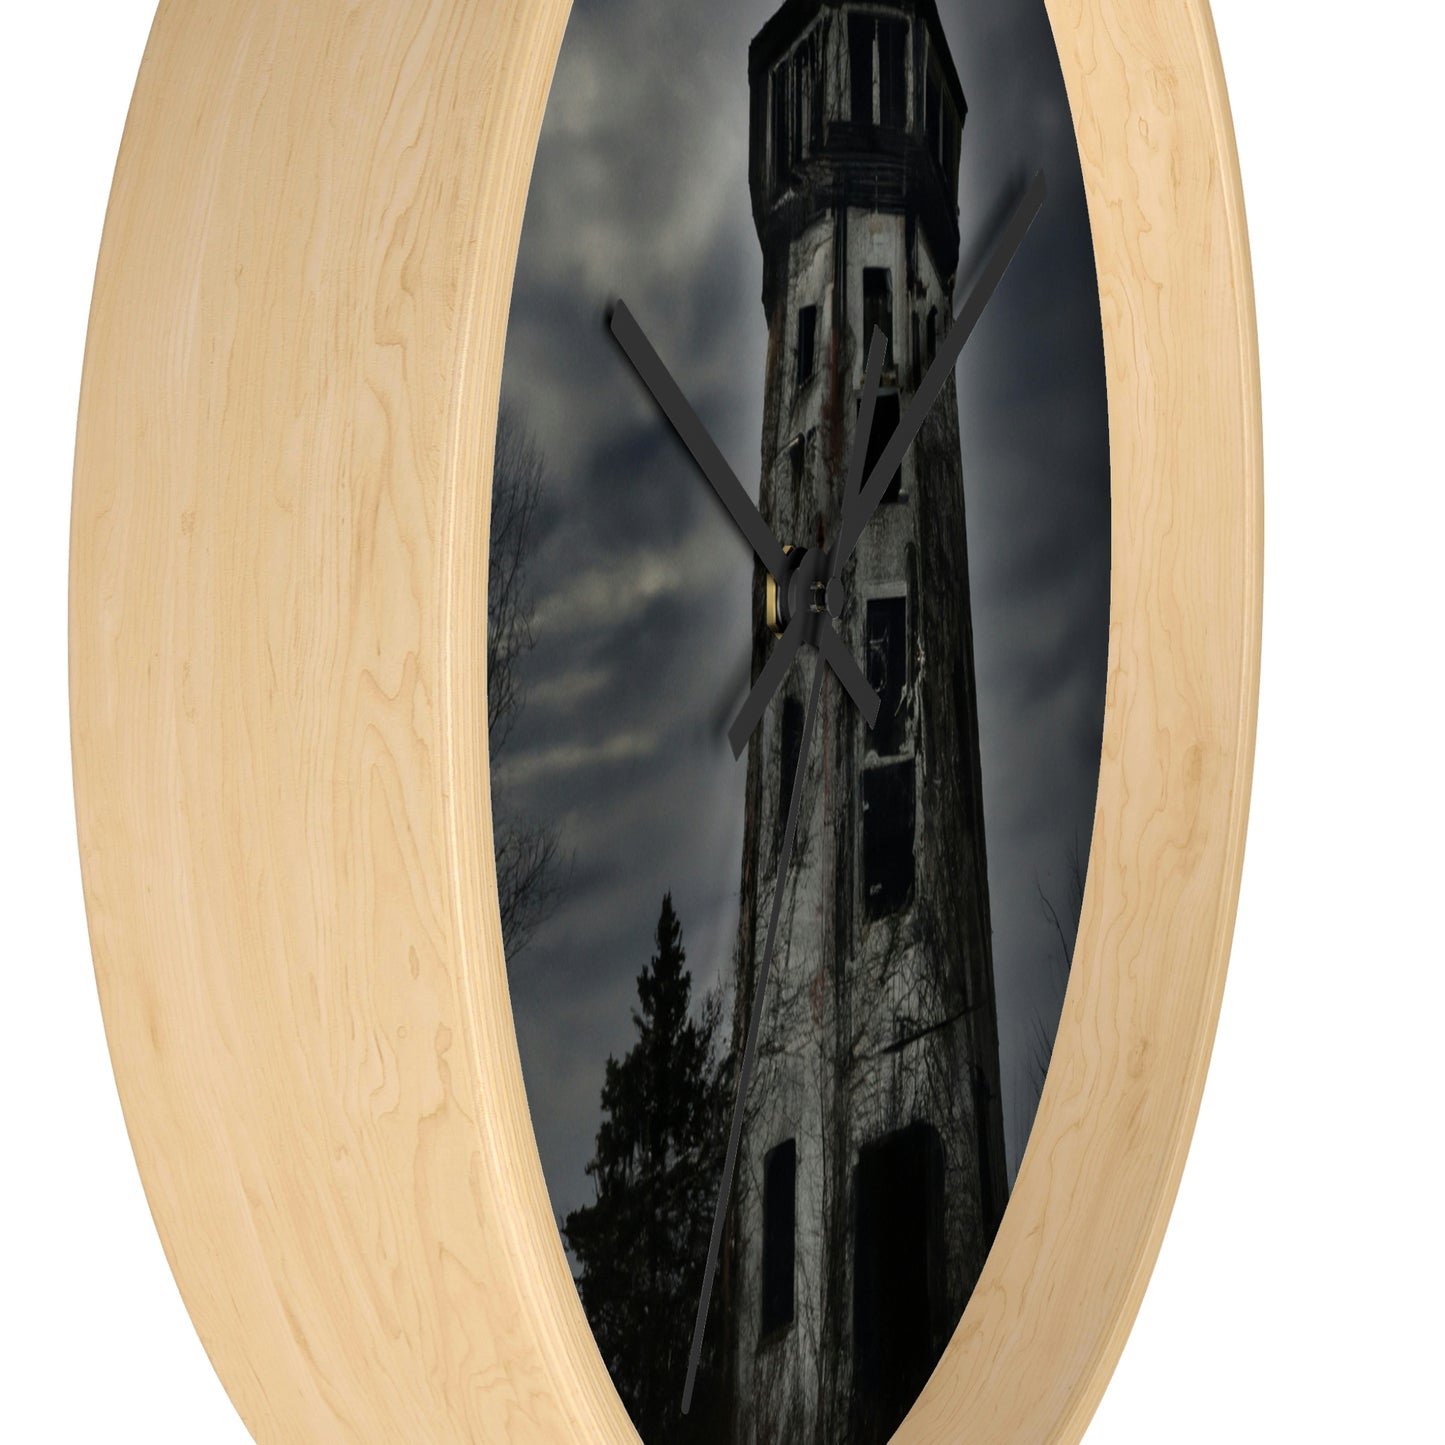 The Sinister Lighthouse - The Alien Wall Clock